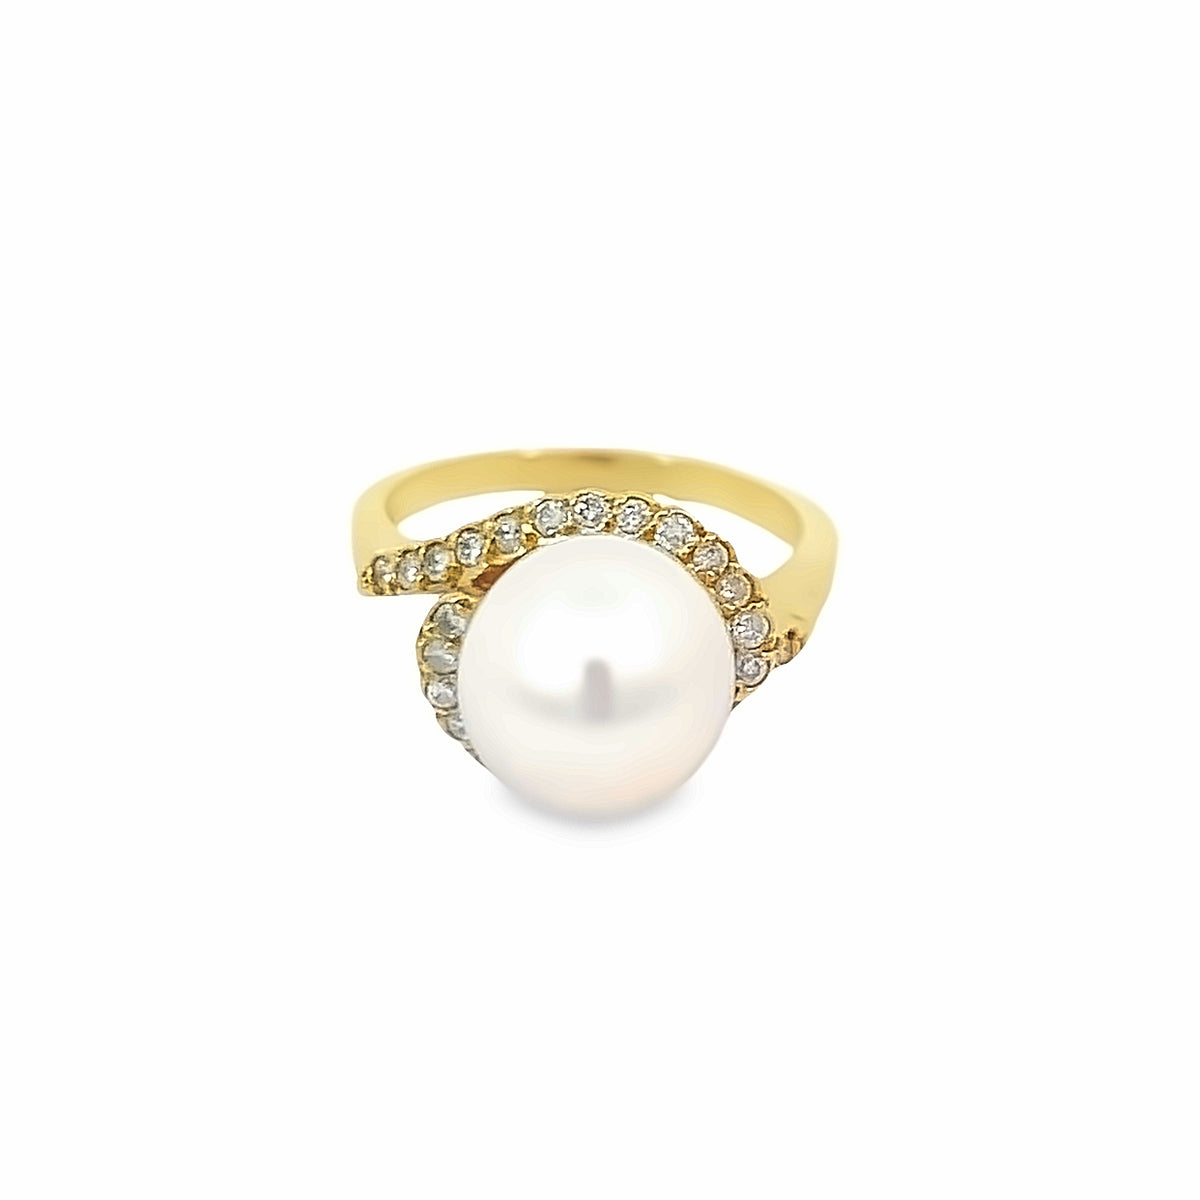 DIAMOND RINGS 14KT GOLD WITH NATURAL PEARL AND DIAMONDS - GBJ-RG00138